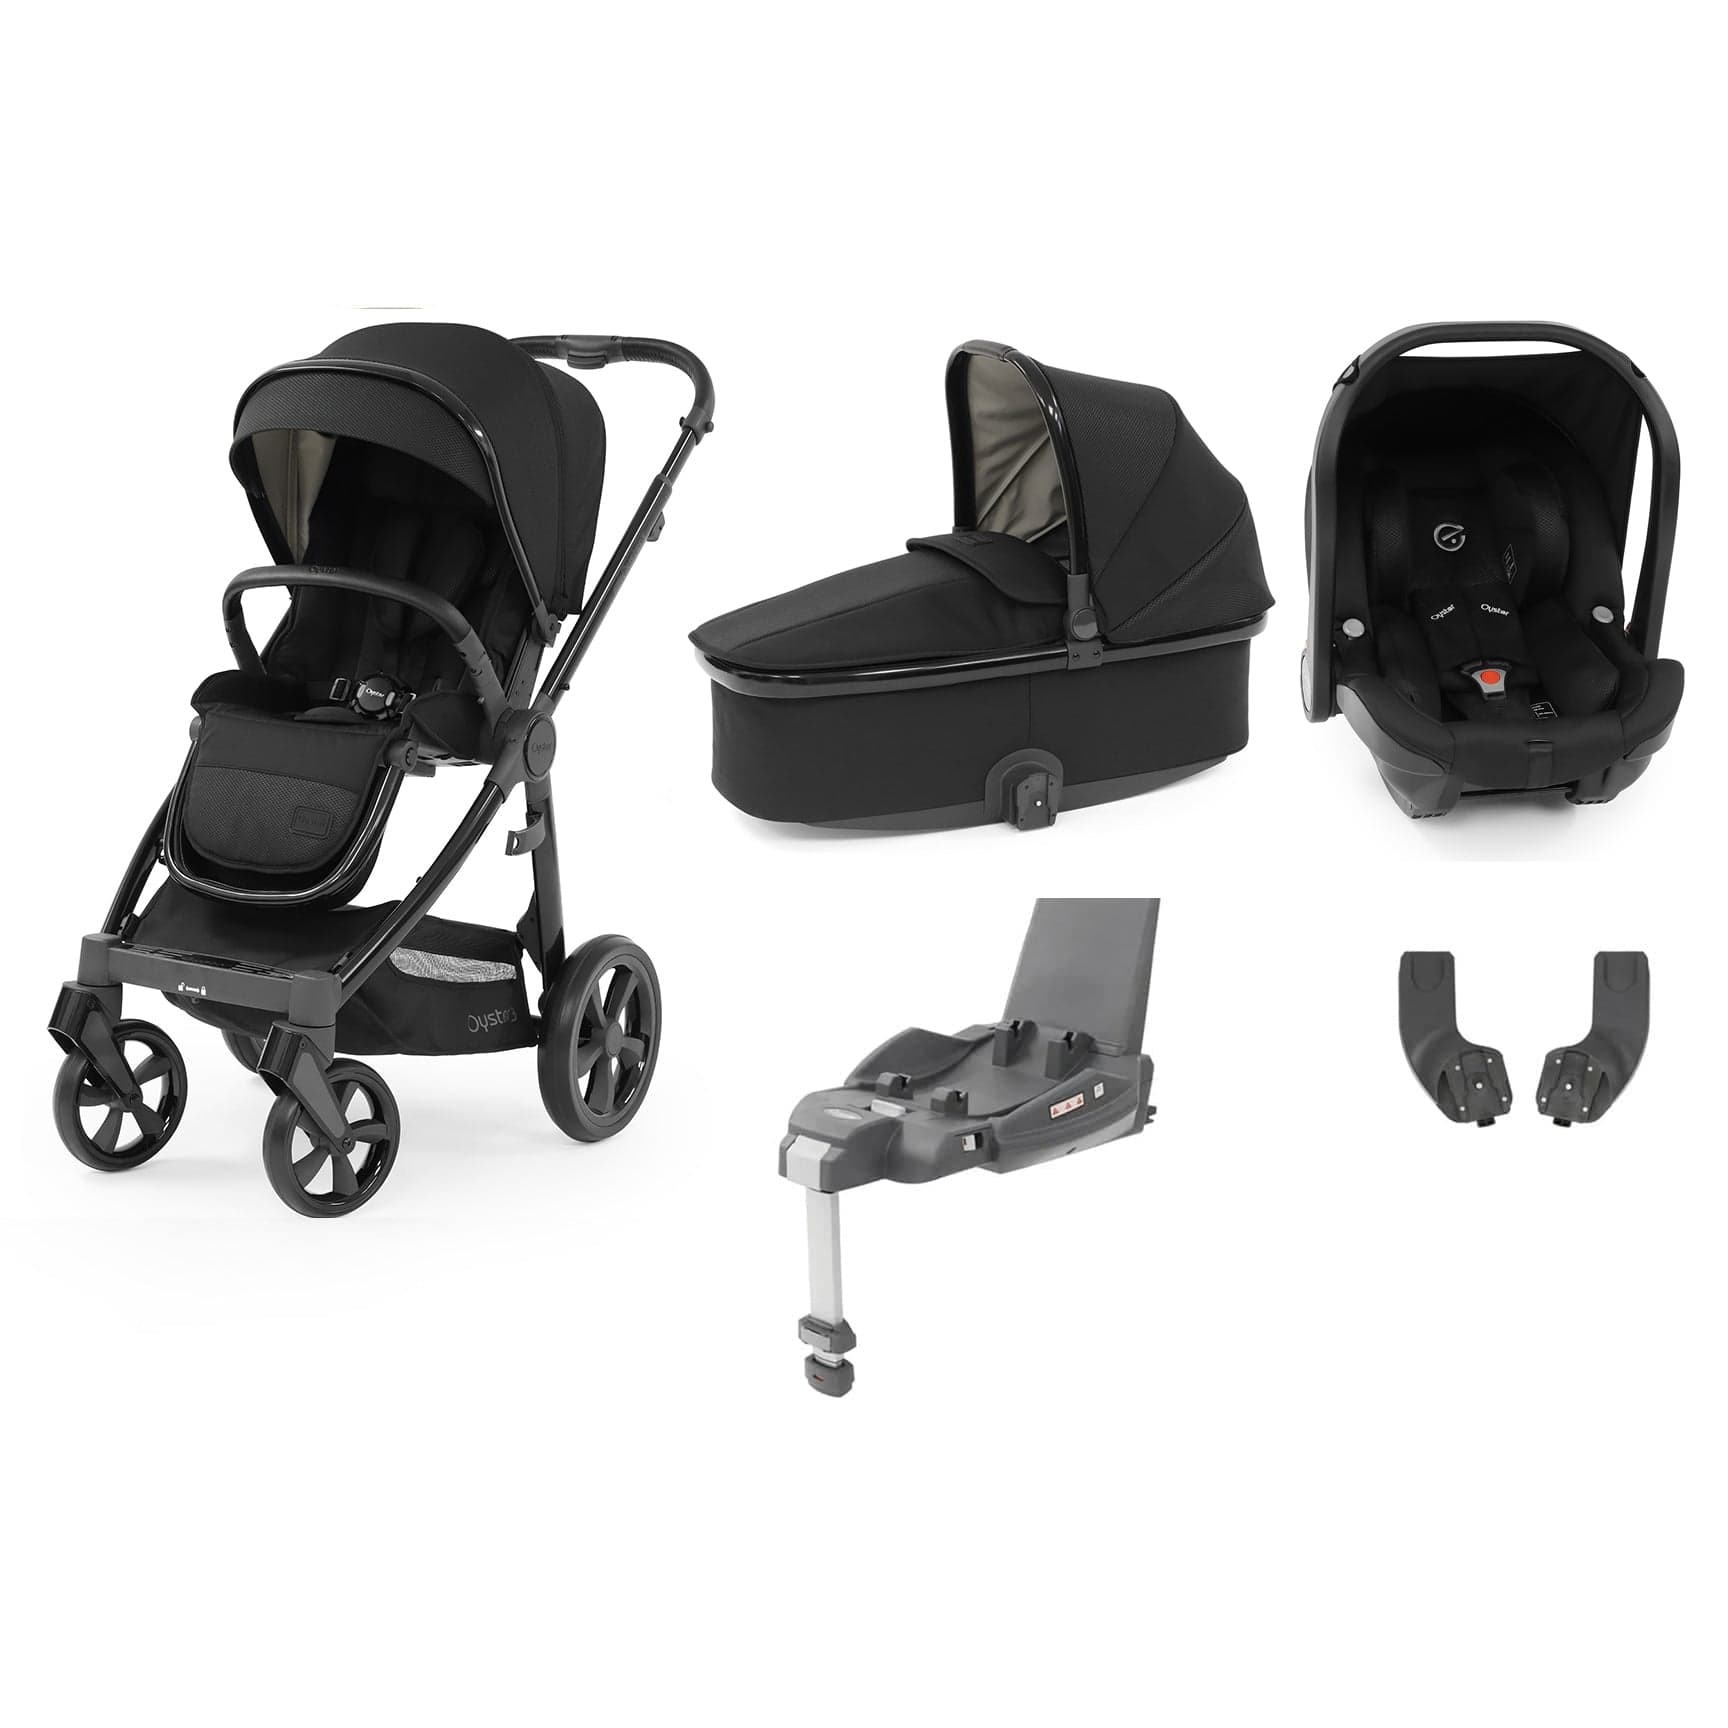 Babystyle Oyster 3 Essential Bundle with Car Seat in Pixel Travel Systems 14745-PXL 5060711565668